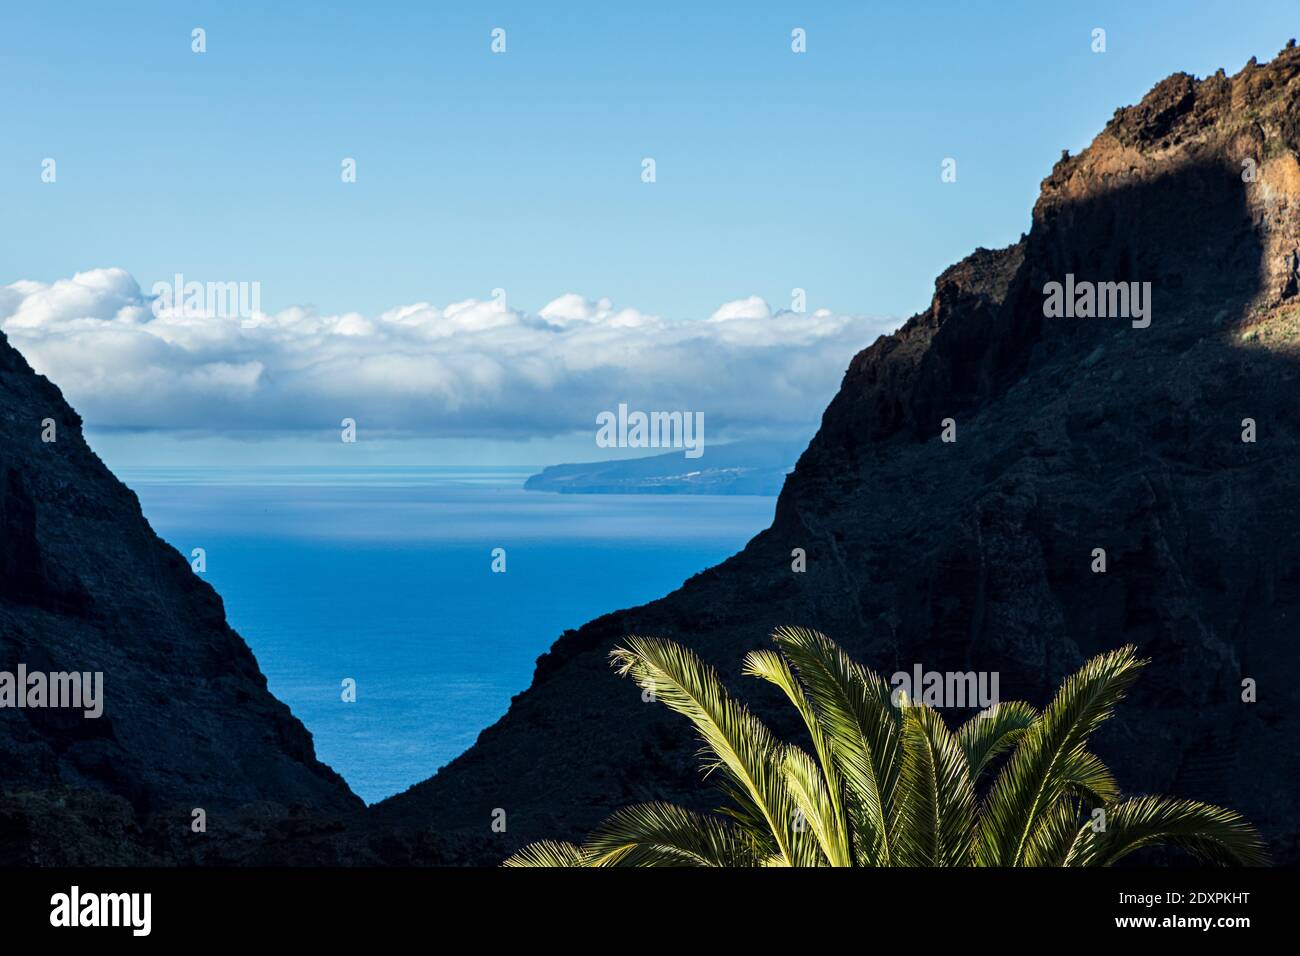 Abstract view through the gorge, barranco, with light hitting palm leaves and V shaped view to the sea, Masca, Tenerife, Canary Islands, Spain Stock Photo